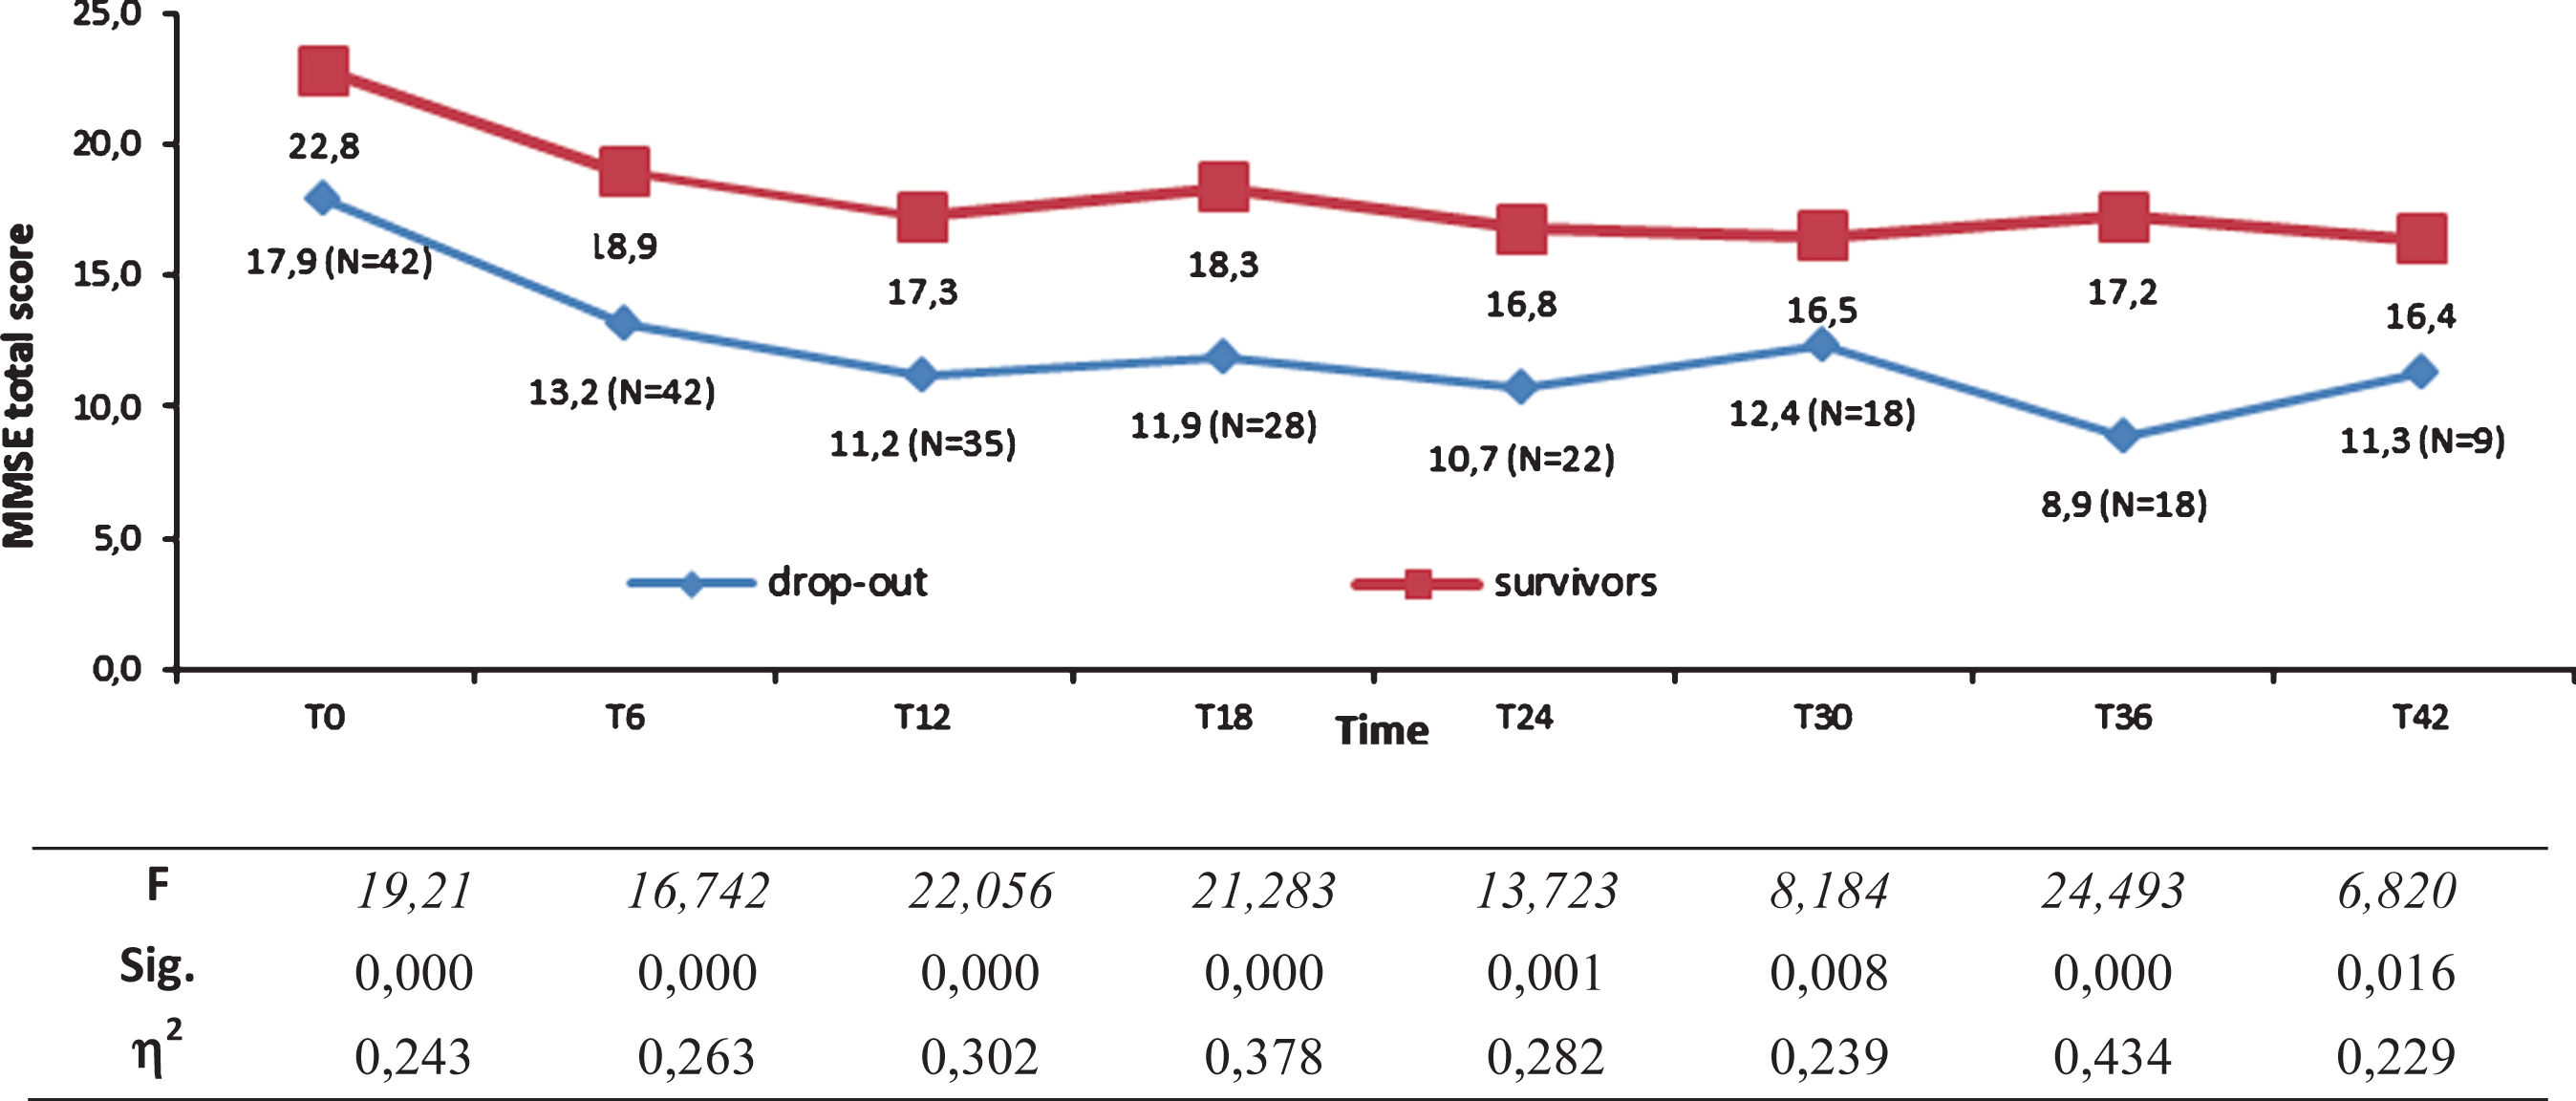 Mini-Mental State Examination (MMSE) total scores of fast decliner (FD) survivors (N = 20) and FD dropouts from T0 to T42 as indicated by progressively decrease number of subjects.